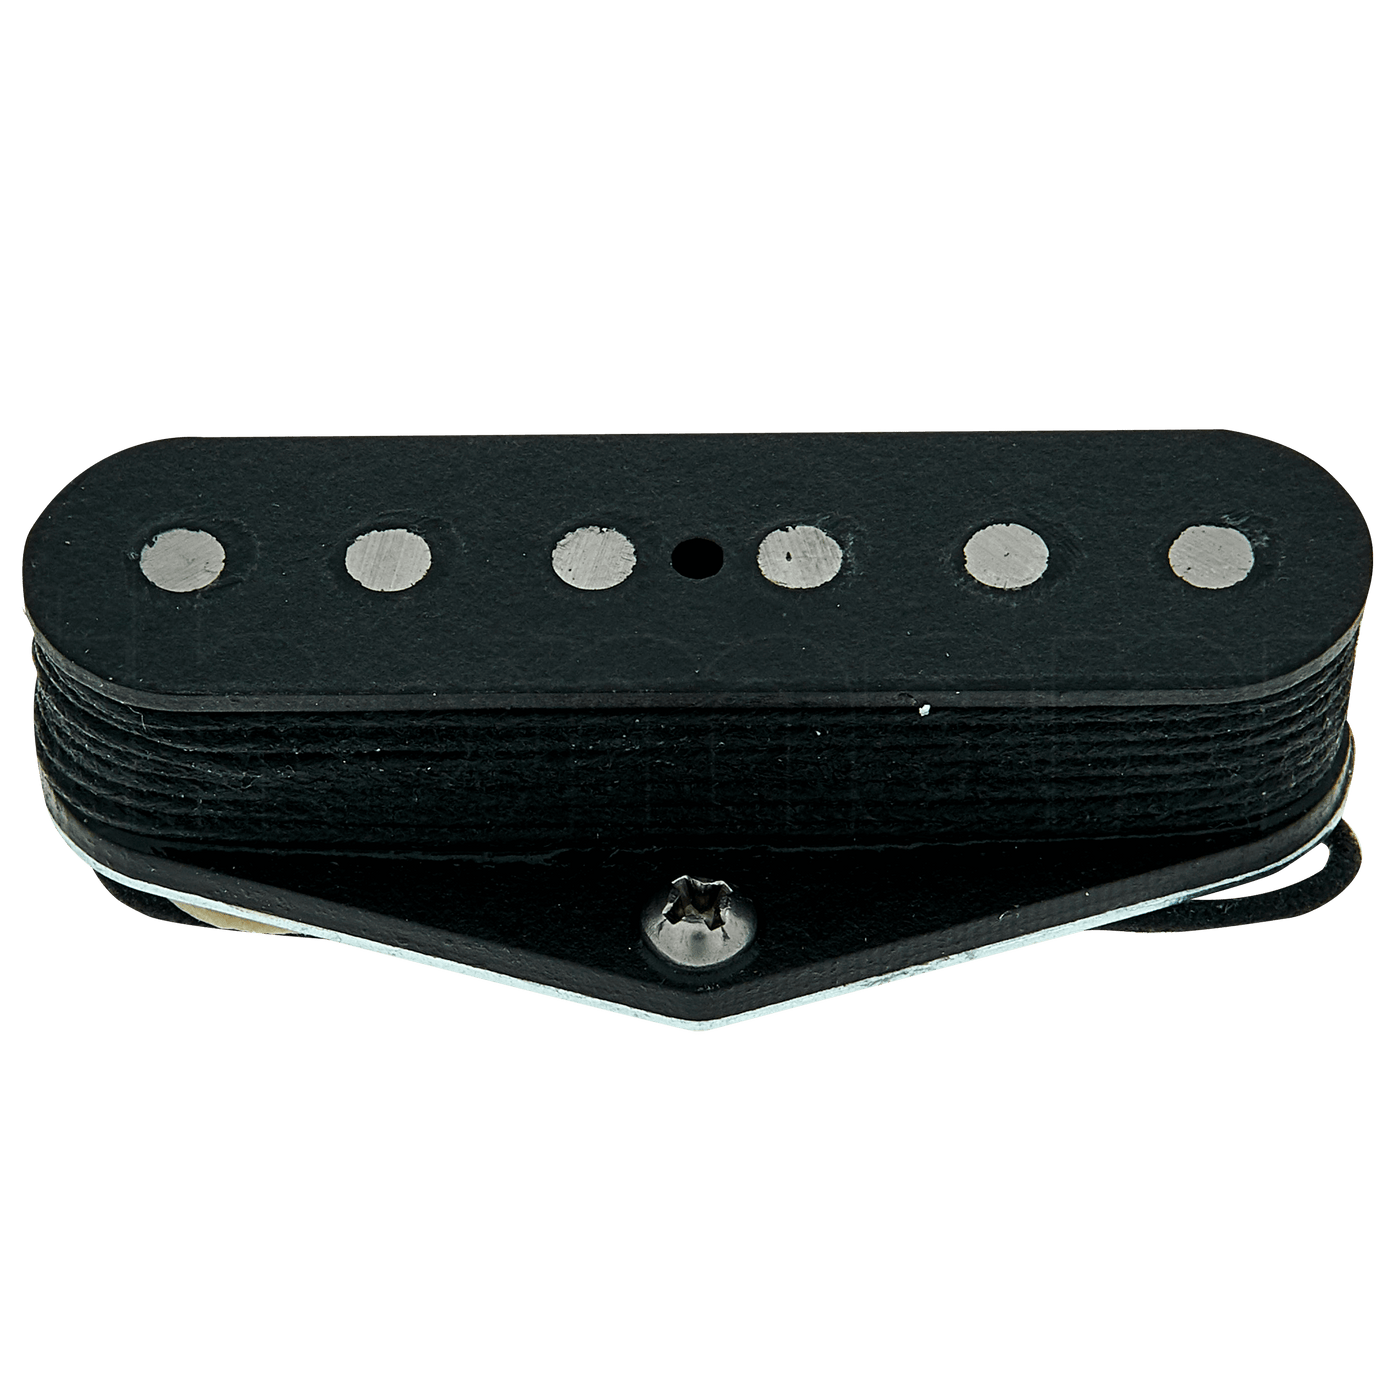 Suhr Classic T Black (Bridge) - $149990 - Gearhub - “We are happy to introduce the new Thornbucker + bridge pickup. It retains all the clarity, warmth, character, and mojo of the original Thornbuckers, and adds a bit more power and oomph. Great for players that like a slightly overwound PAF-type tone!”. “We’re overjoyed with the enthusiasm from players for the Thornbucker humbucking pickups! The pickups have been a resounding success, garnering praise for their extraordinary tone and balance. I’m truly hono